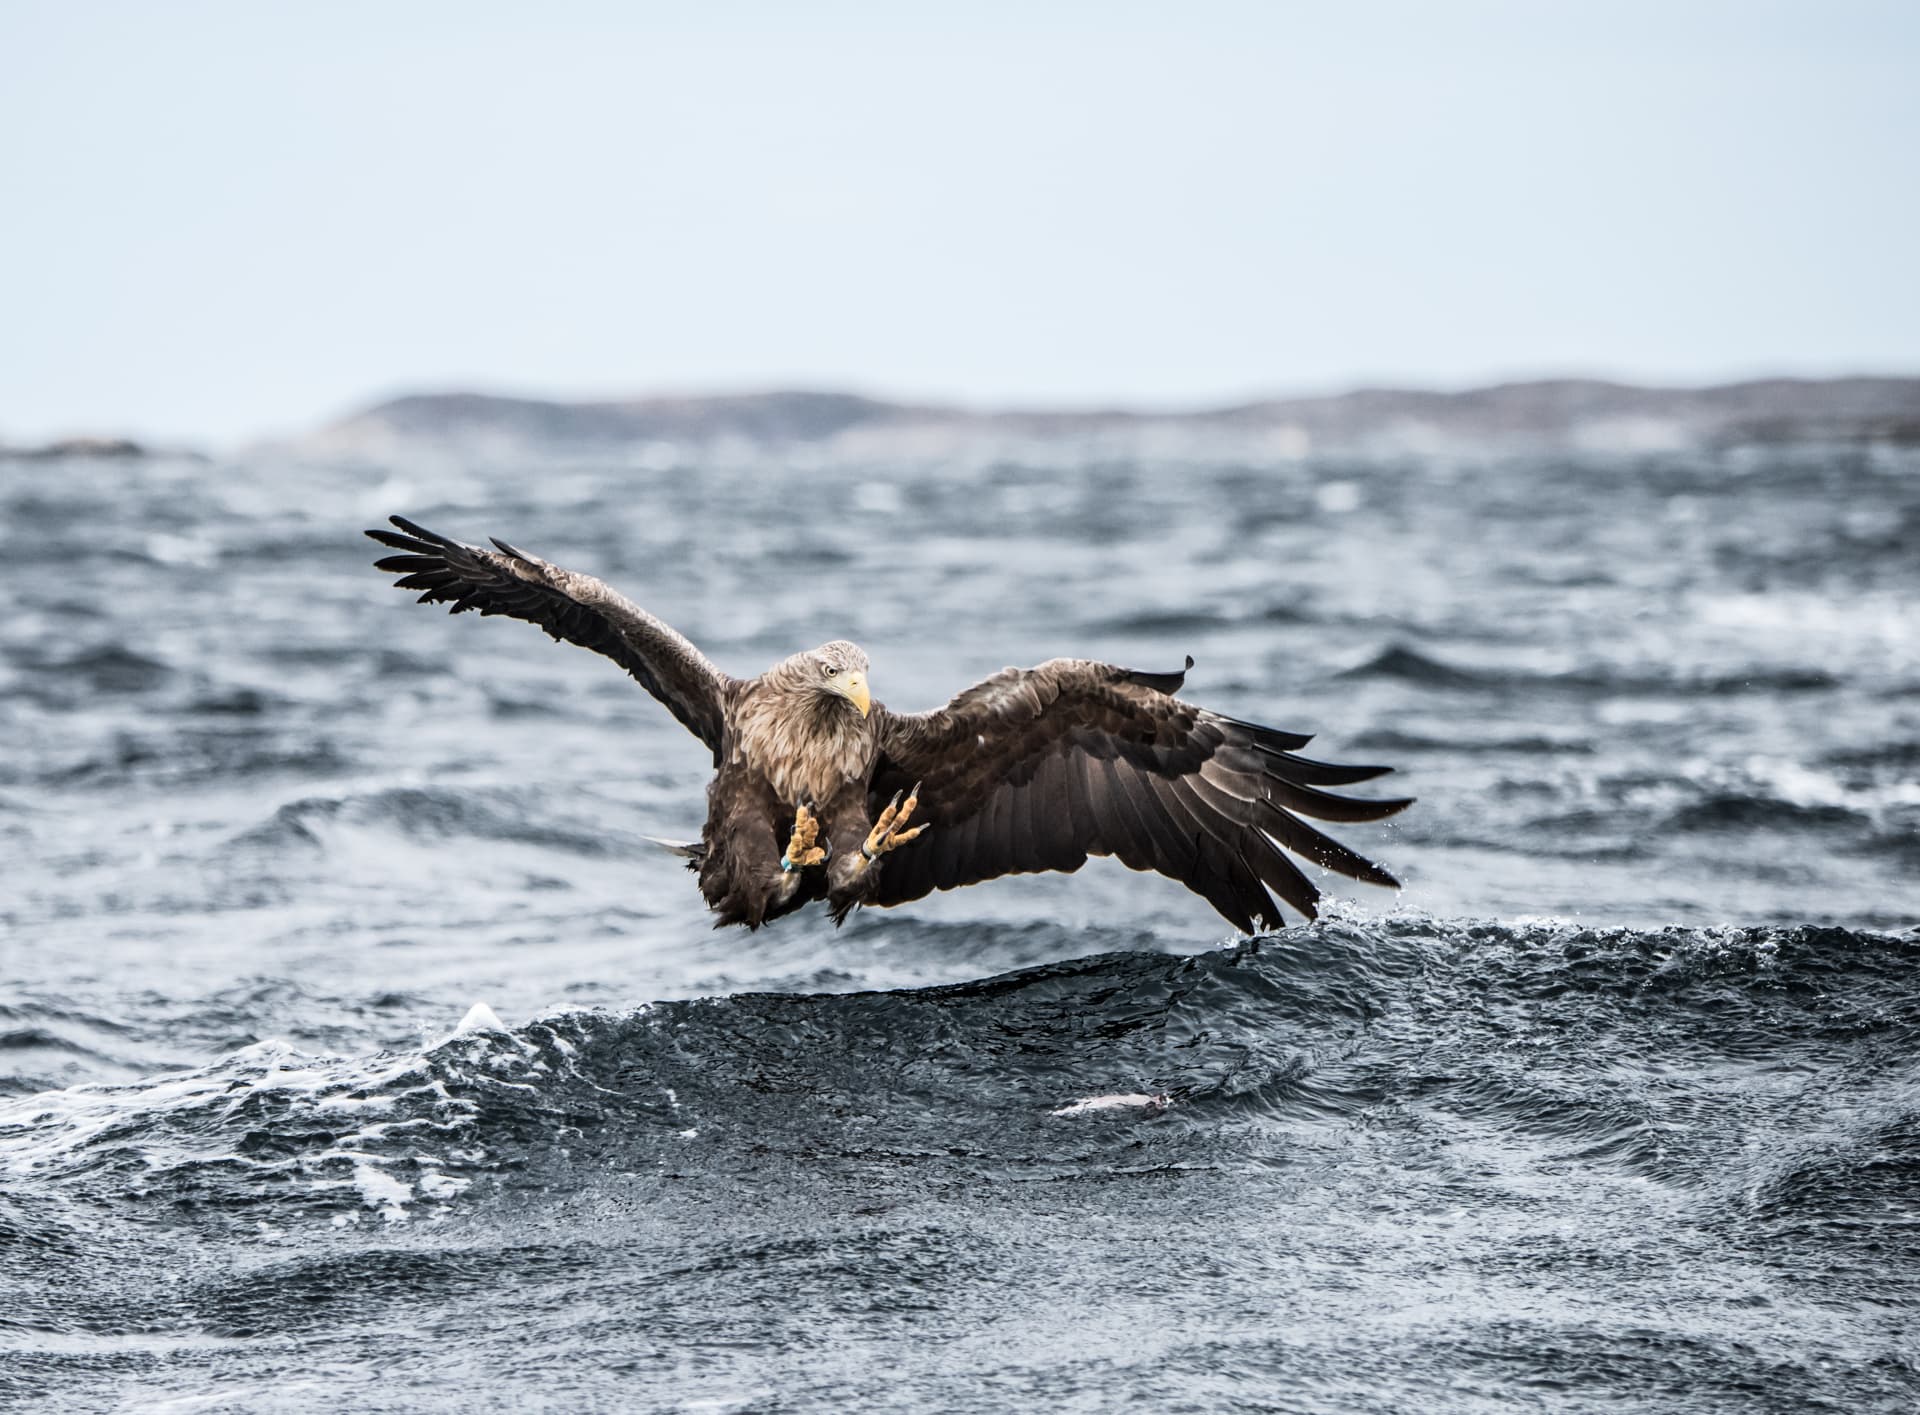 A White-tailed Eagle swoops over waves - one of the species photographed during the Winter Eagles of Norway photography holiday